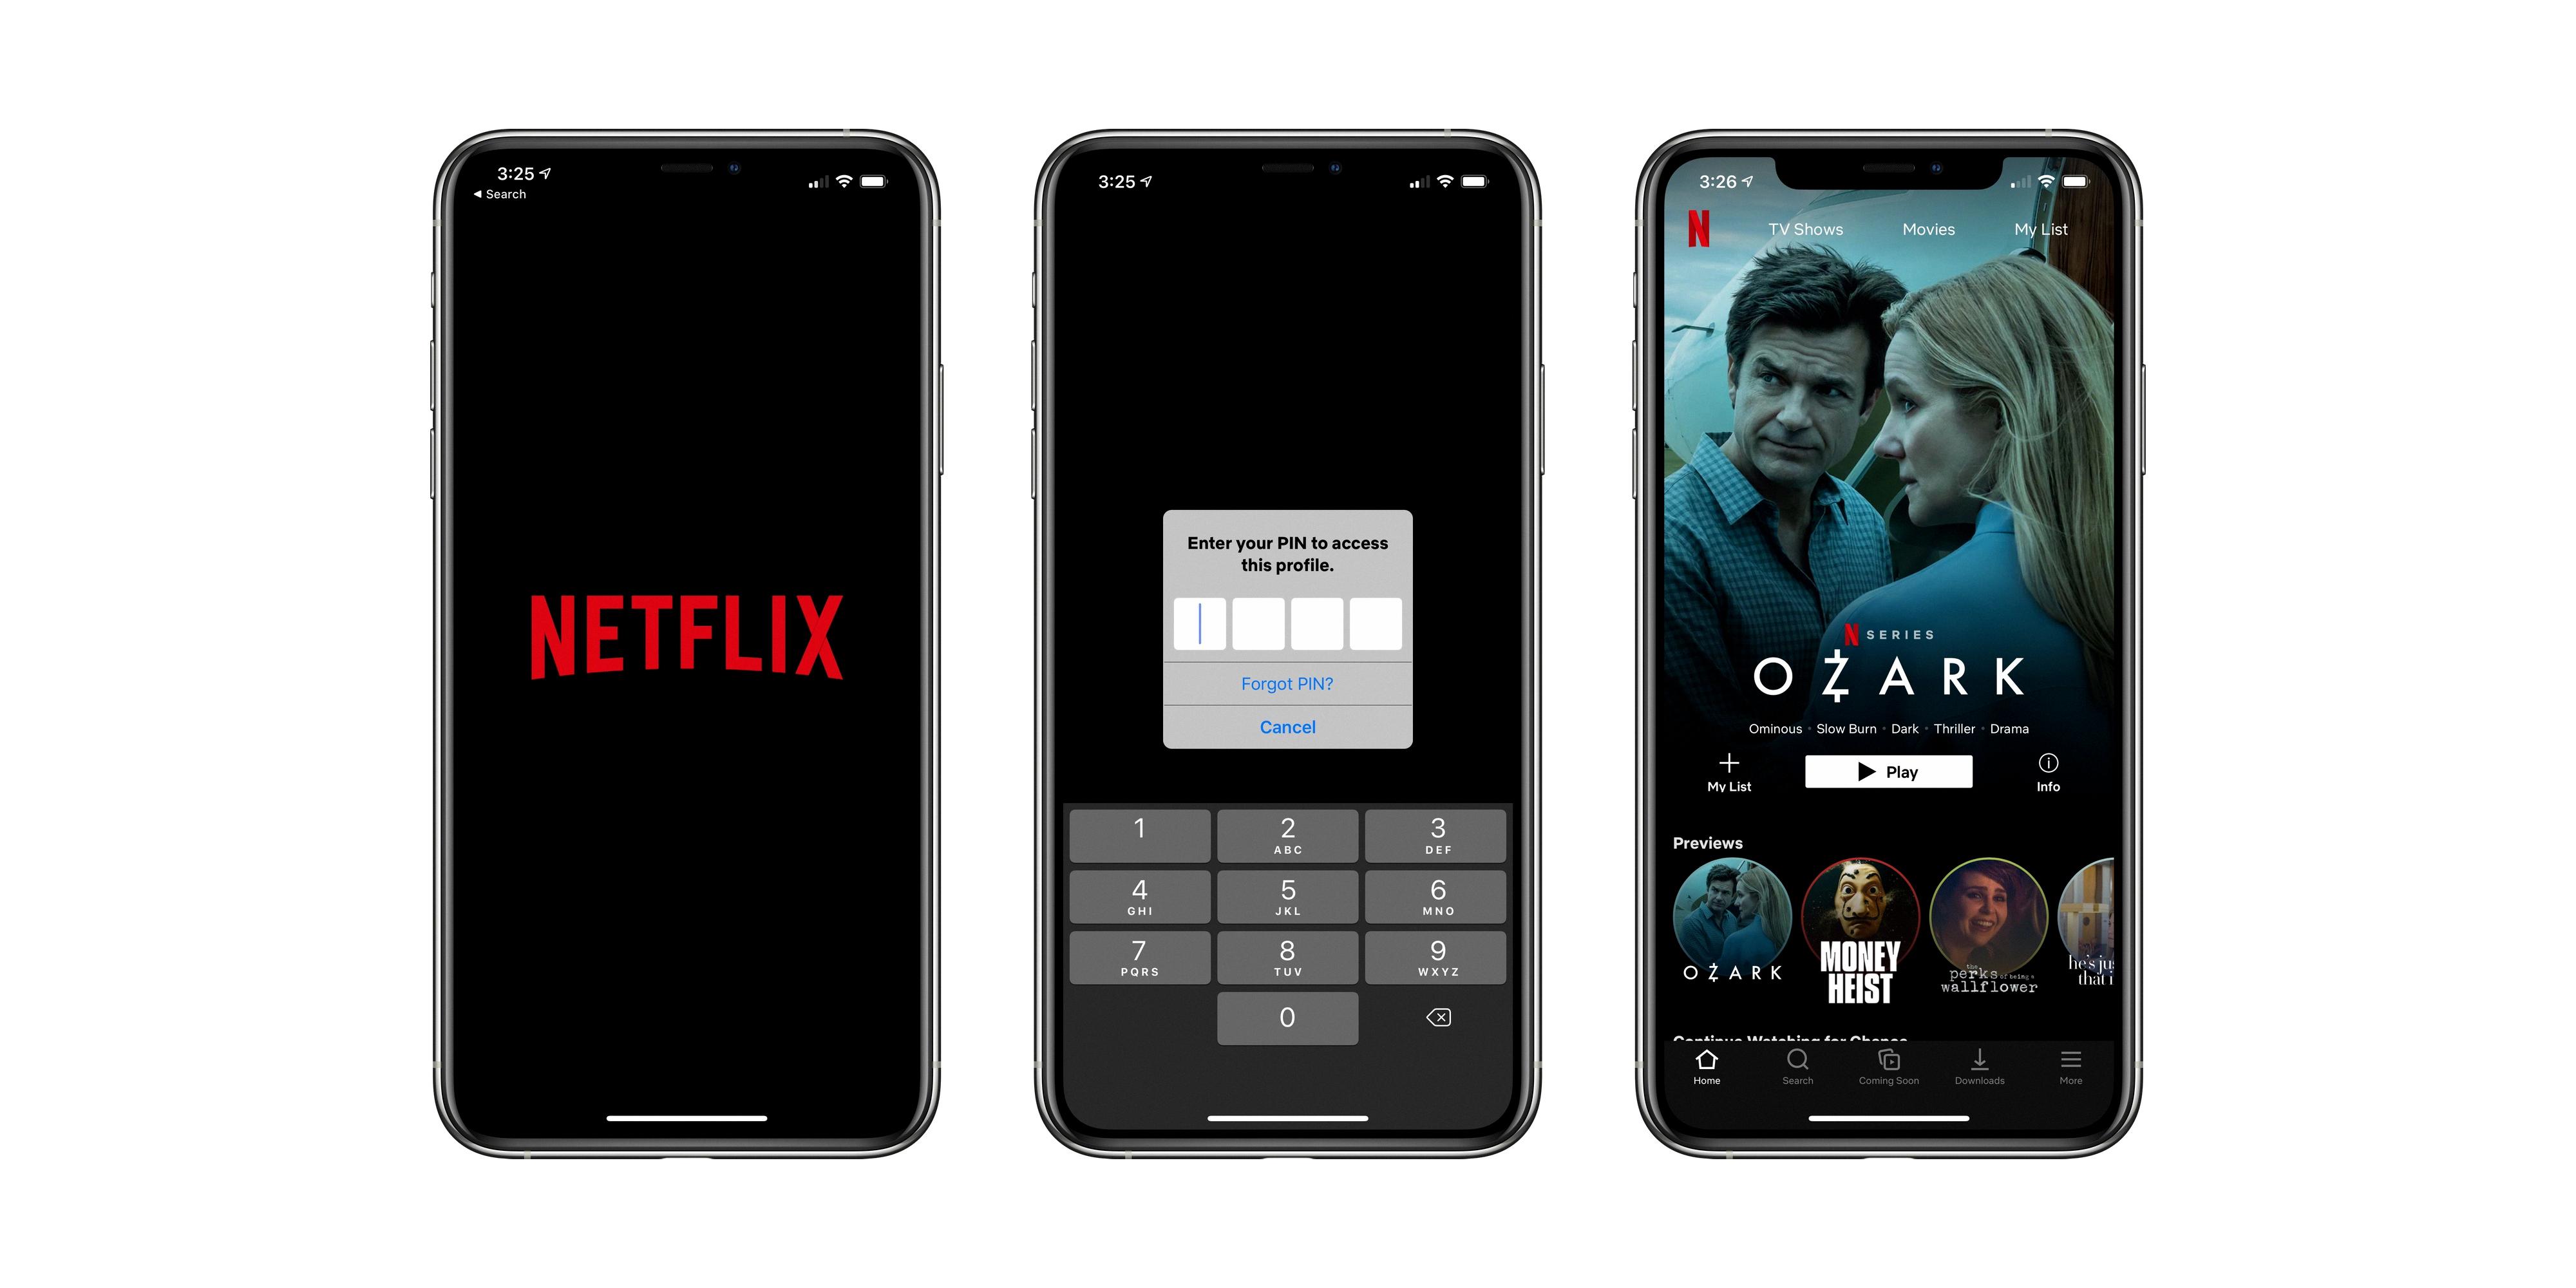 How to Lock Your Netflix Profile On iPhone? 15